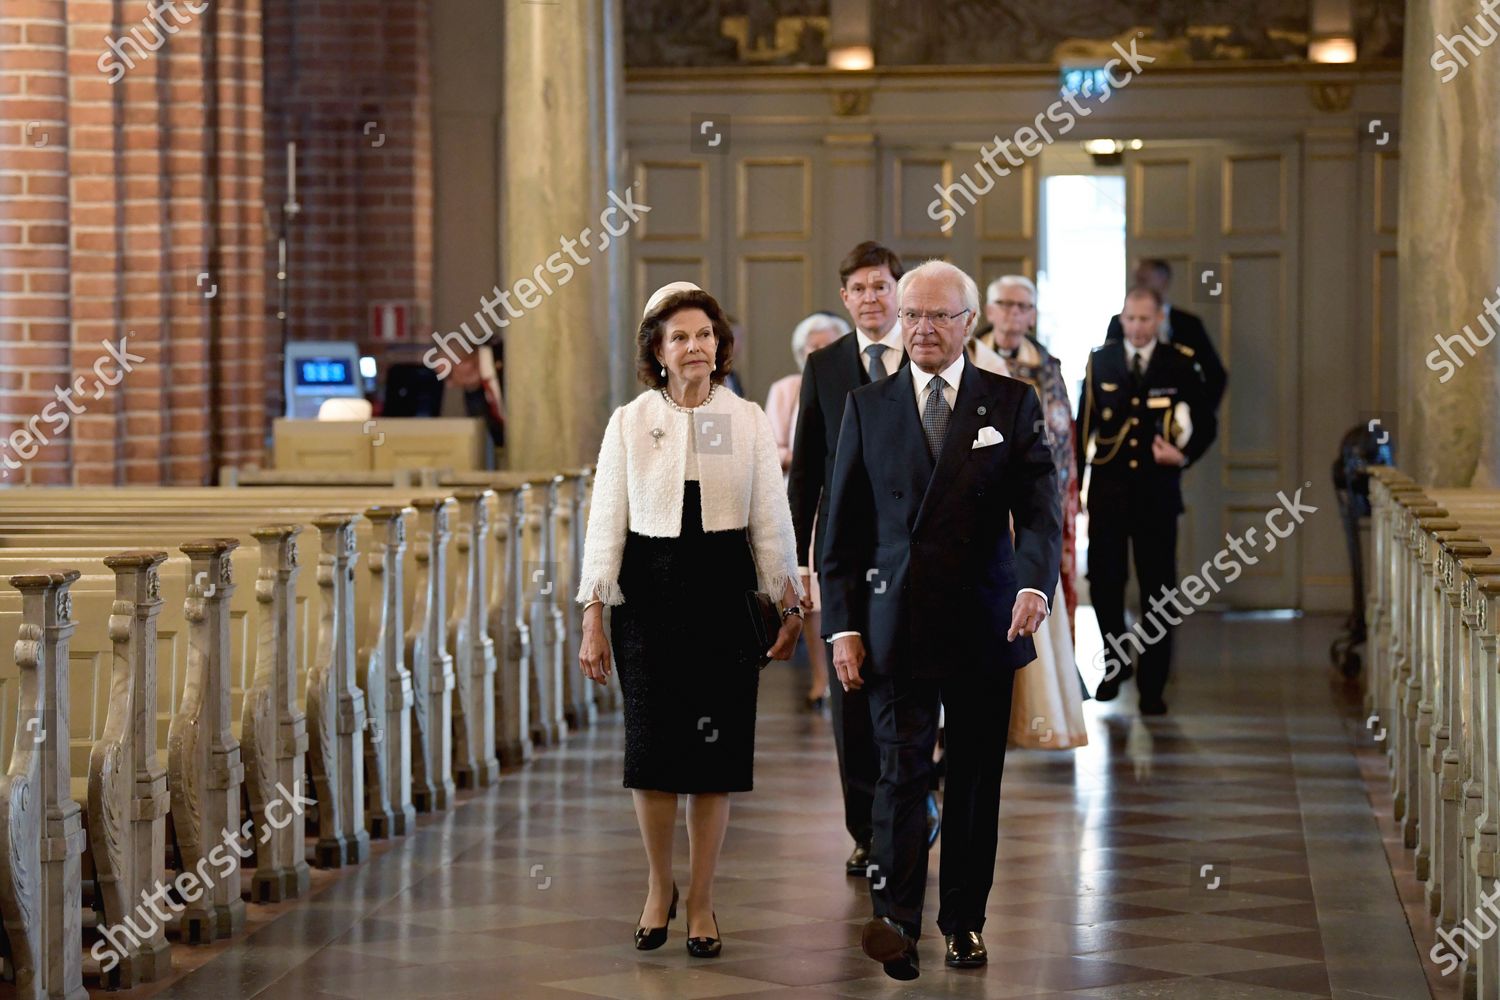 CASA REAL DE SUECIA - Página 62 Opening-of-the-parliamentary-session-stockholm-cathedral-stockholm-sweden-shutterstock-editorial-10769598l